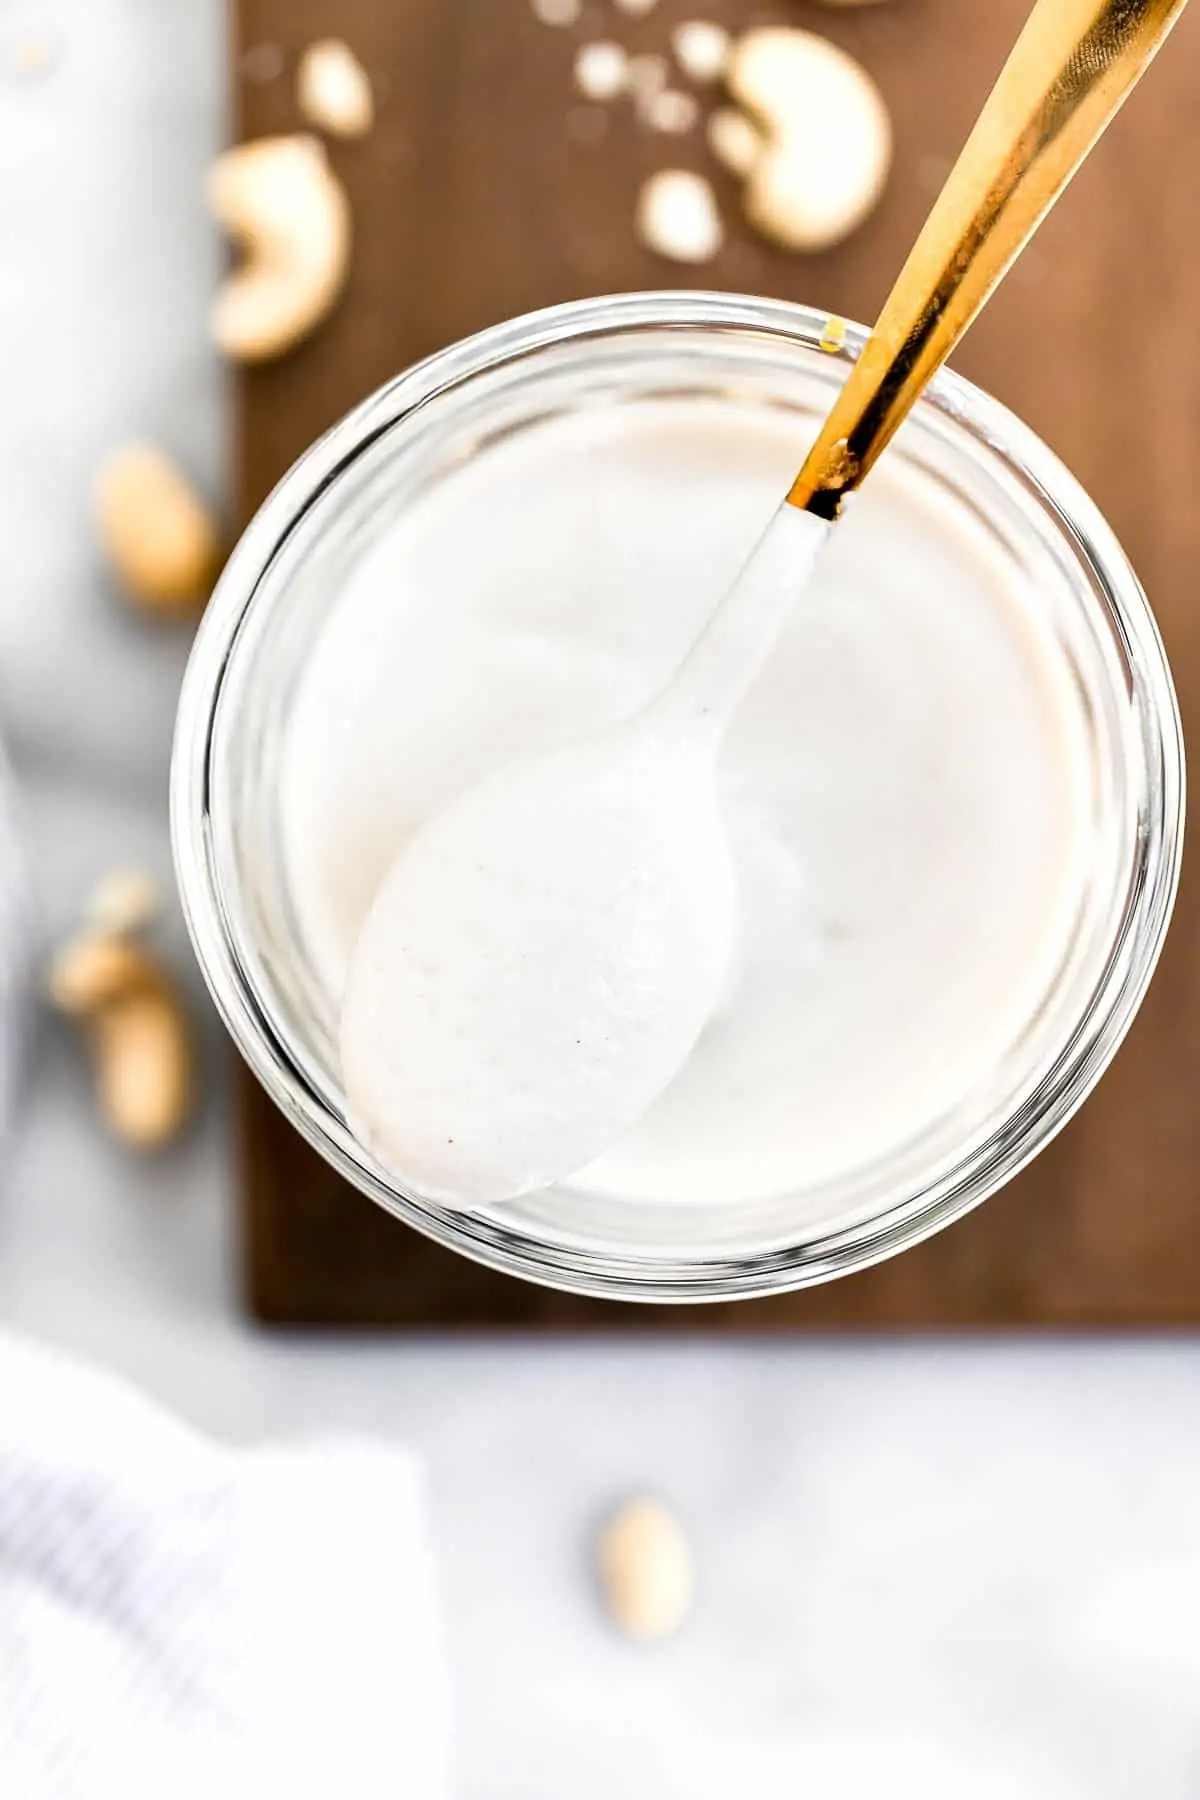 Cashew cream in a jar with a gold spoon sitting on top.